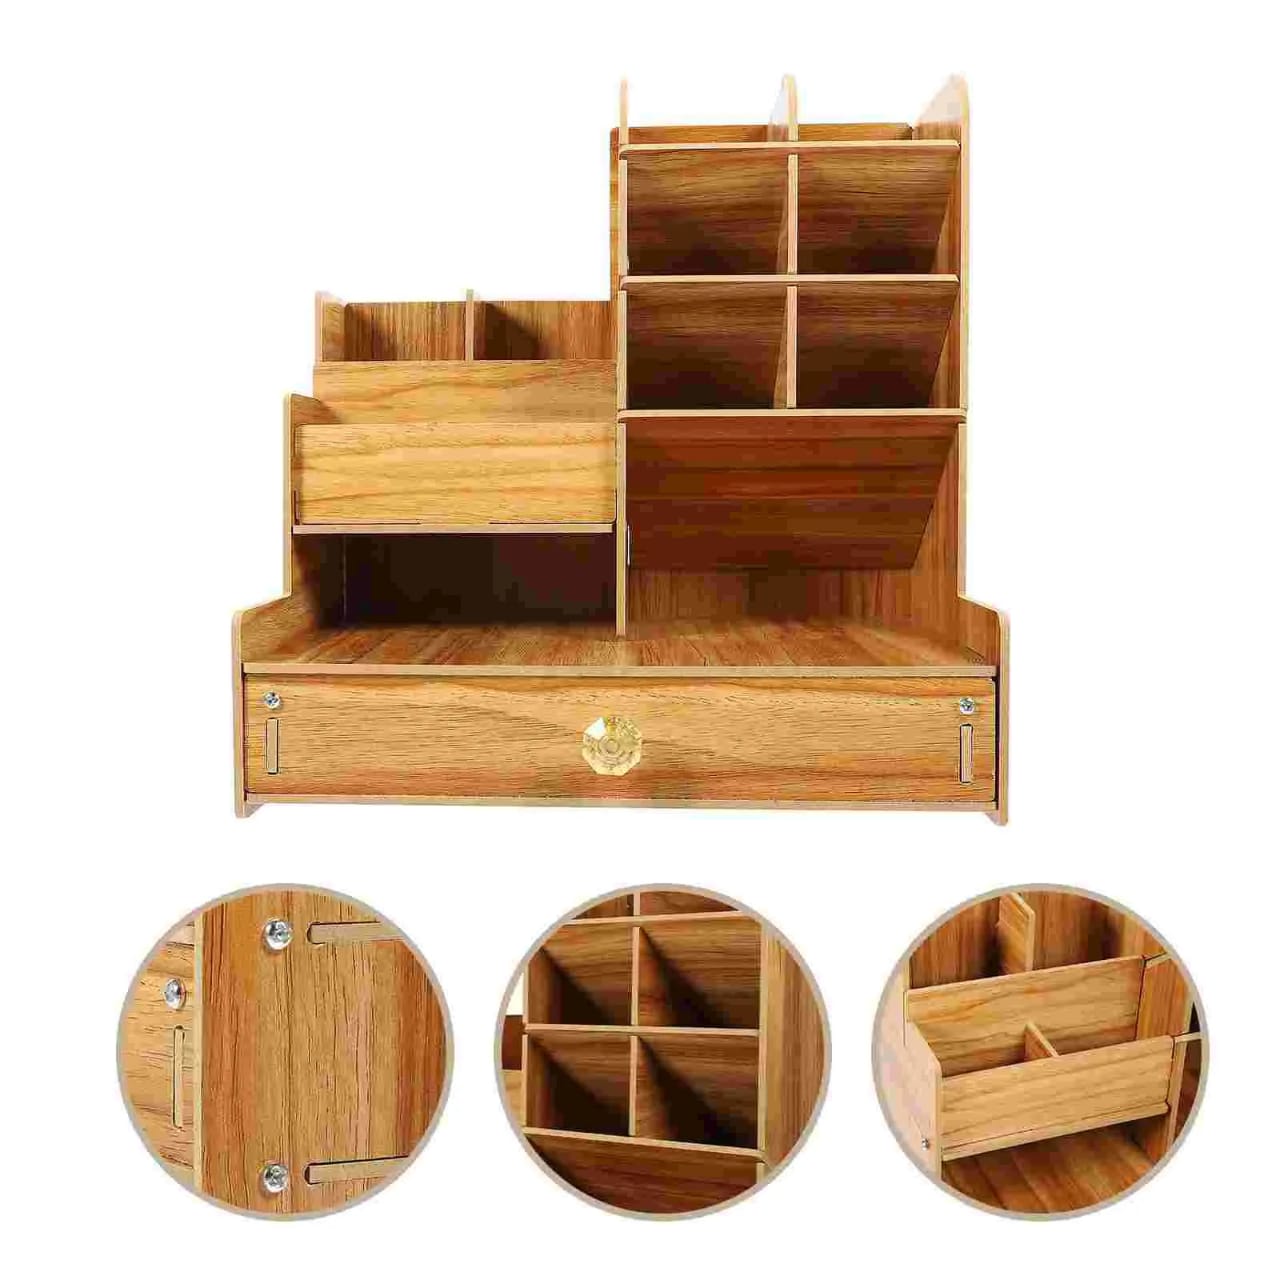 Drawers of Wooden Stand Organizer.